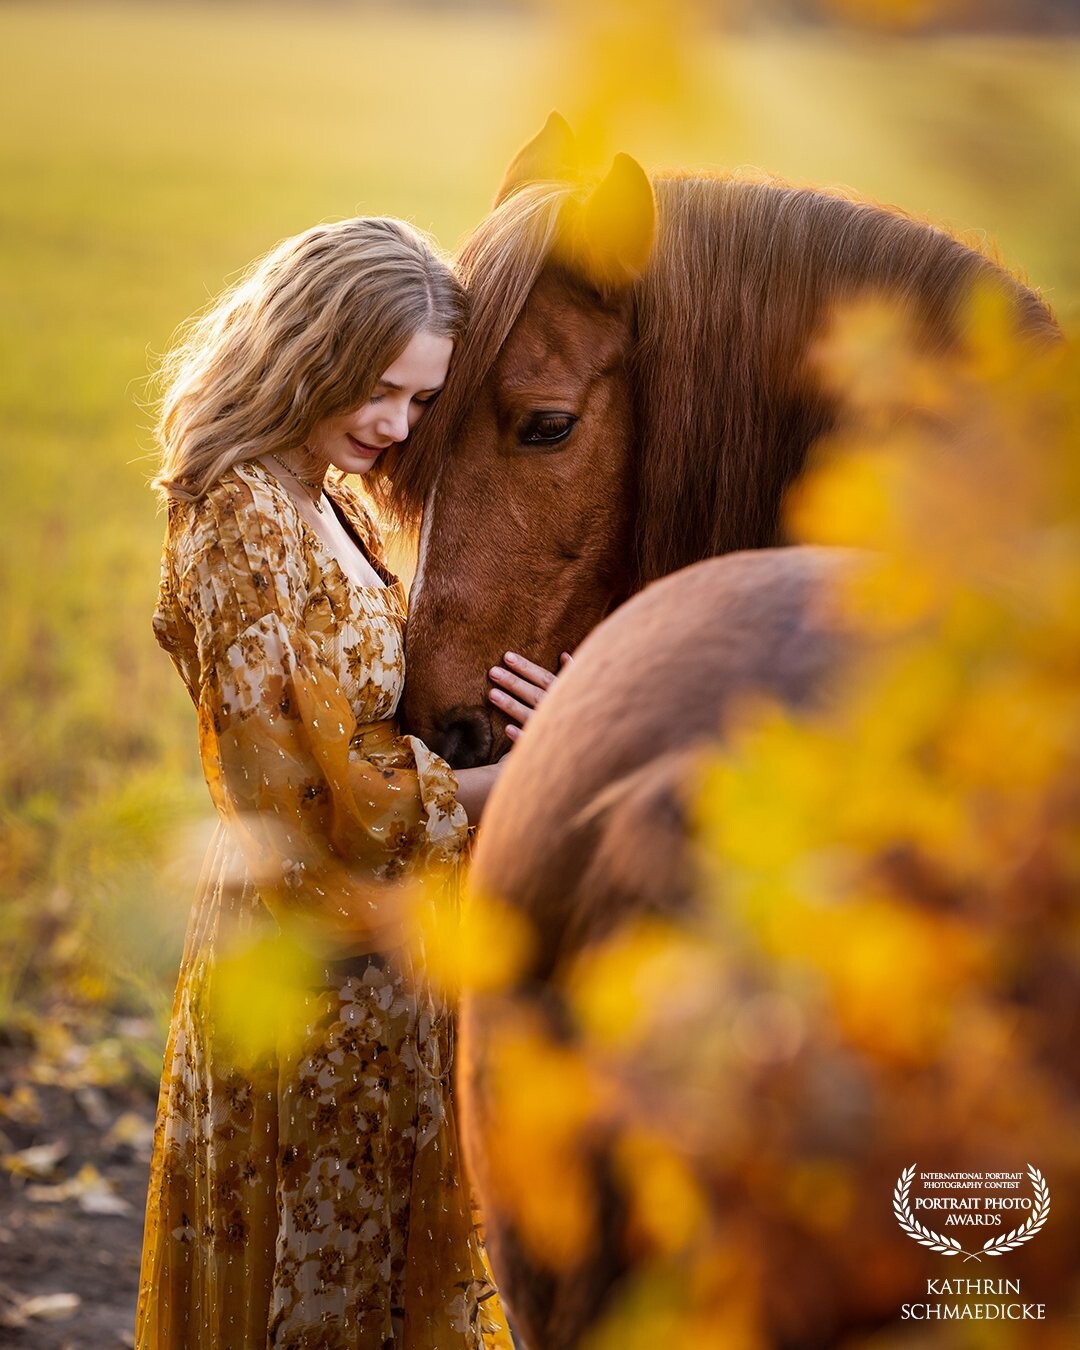 Horse and human <br />
A particularly expressive connection between horse and human which touches emotionally.<br />
I try to capture as many emotions as possible in my photography